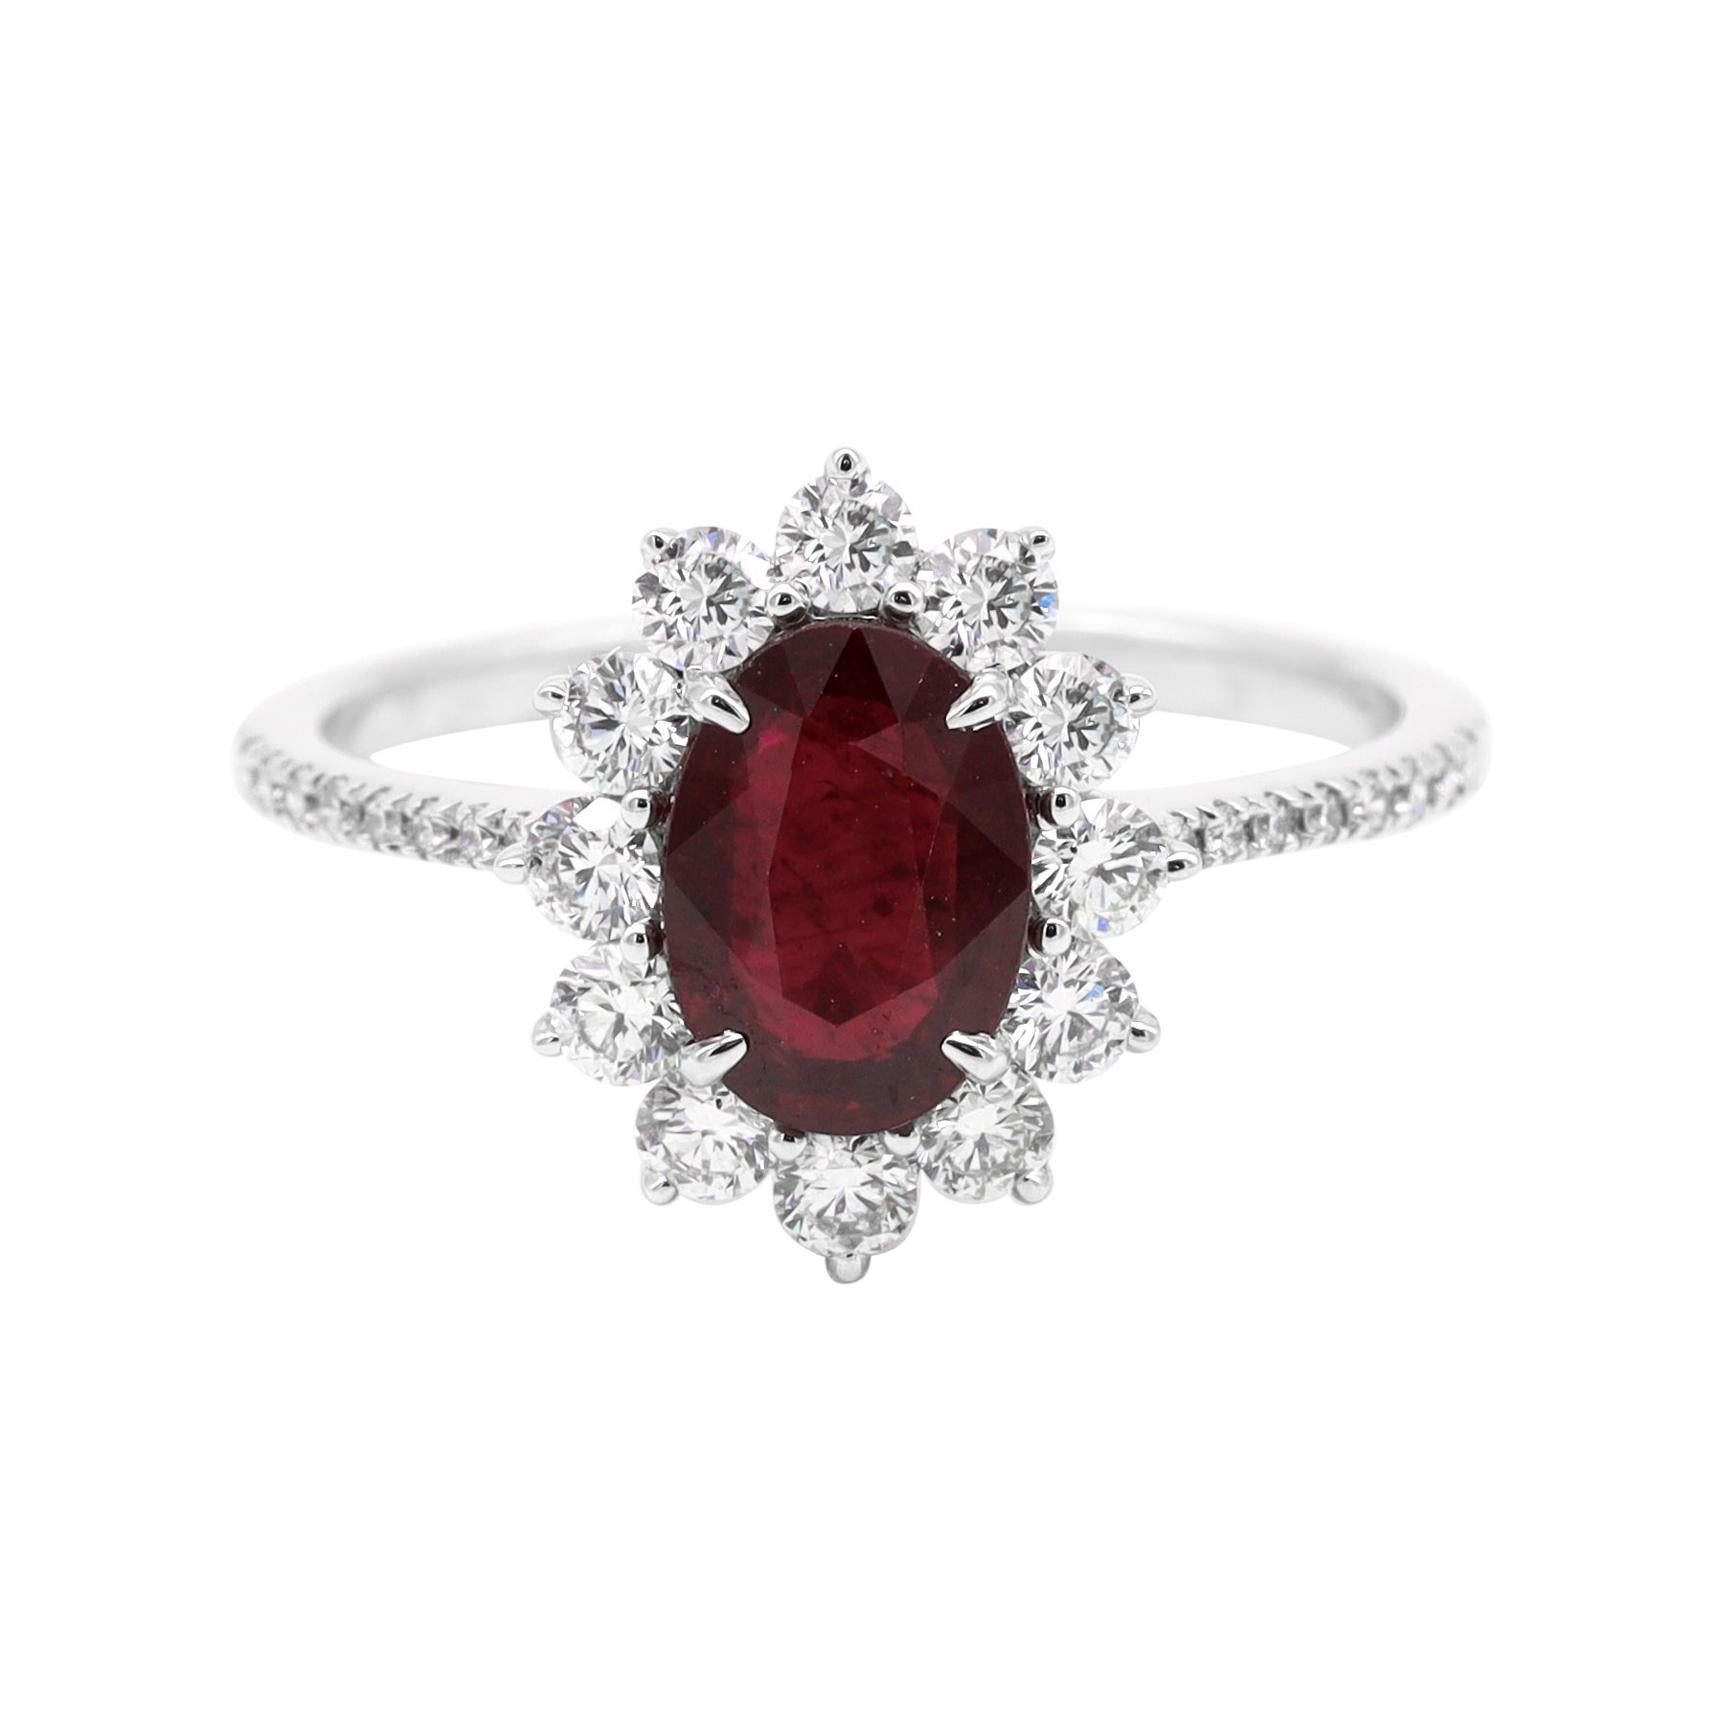 18 Karat White Gold 1.35 Carat Deep Red Ruby Oval-Cut and Diamond Cluster Ring